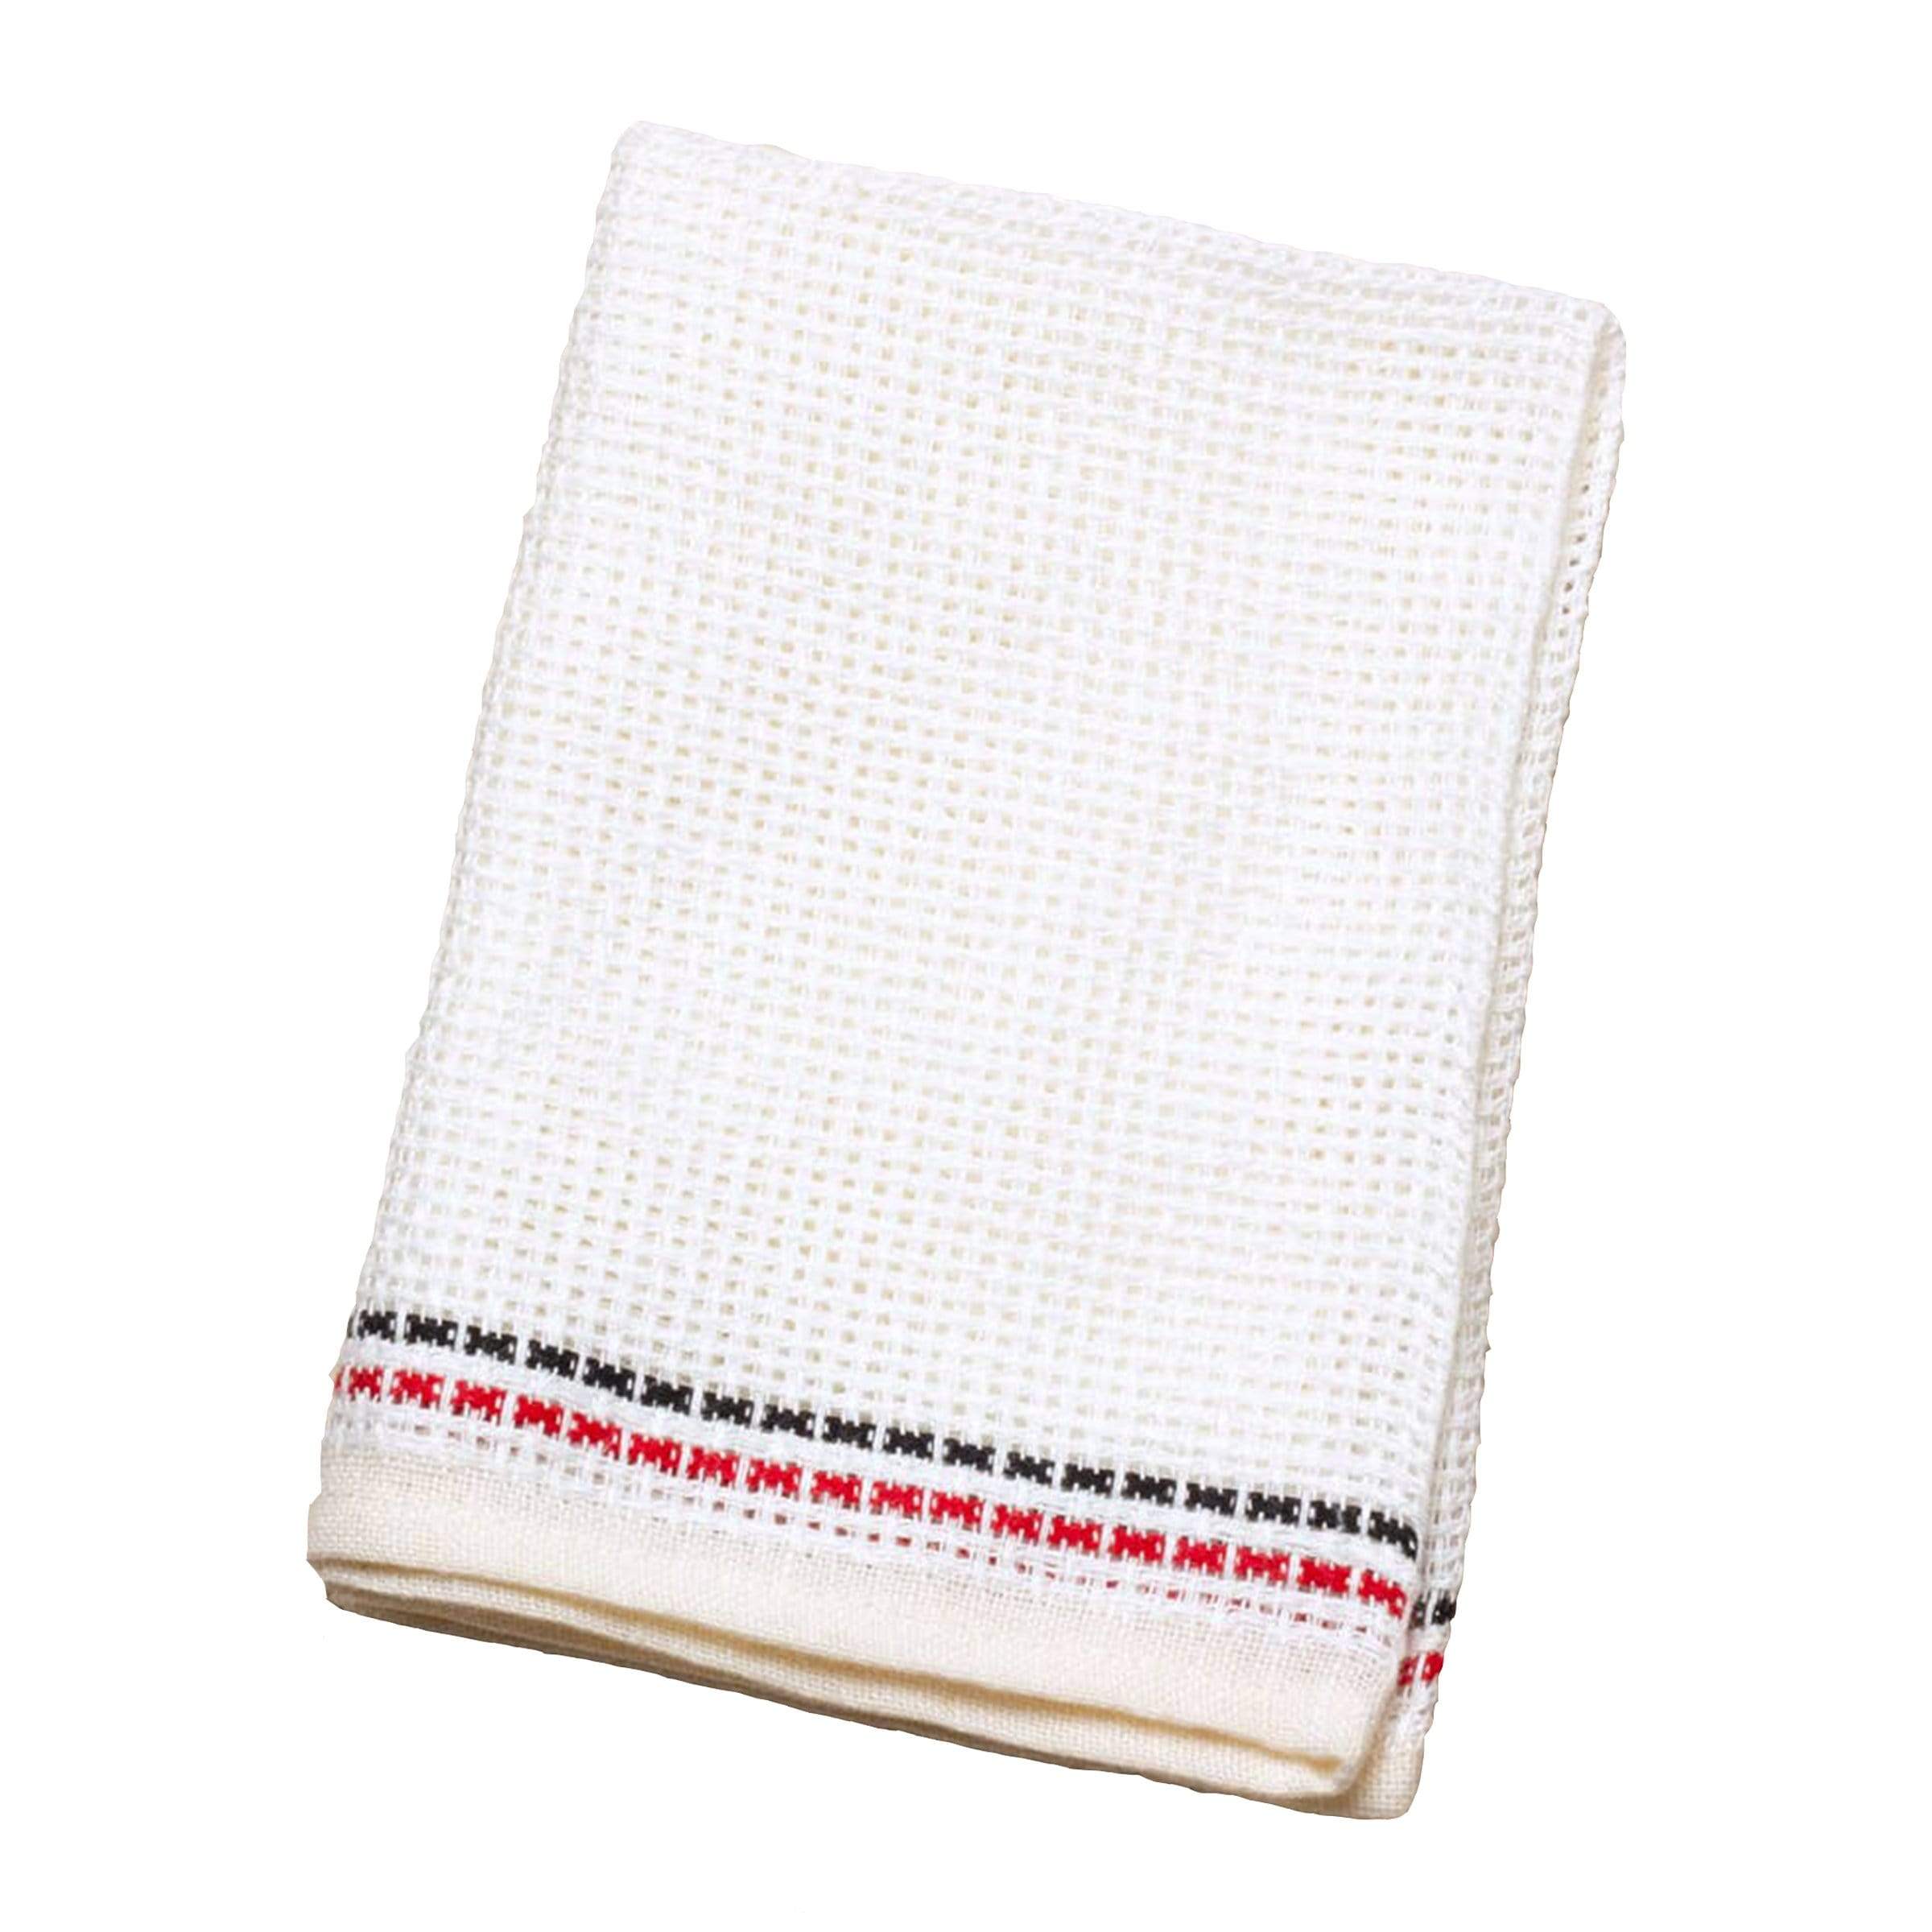 Dish Cloth Household Cleaning Towel